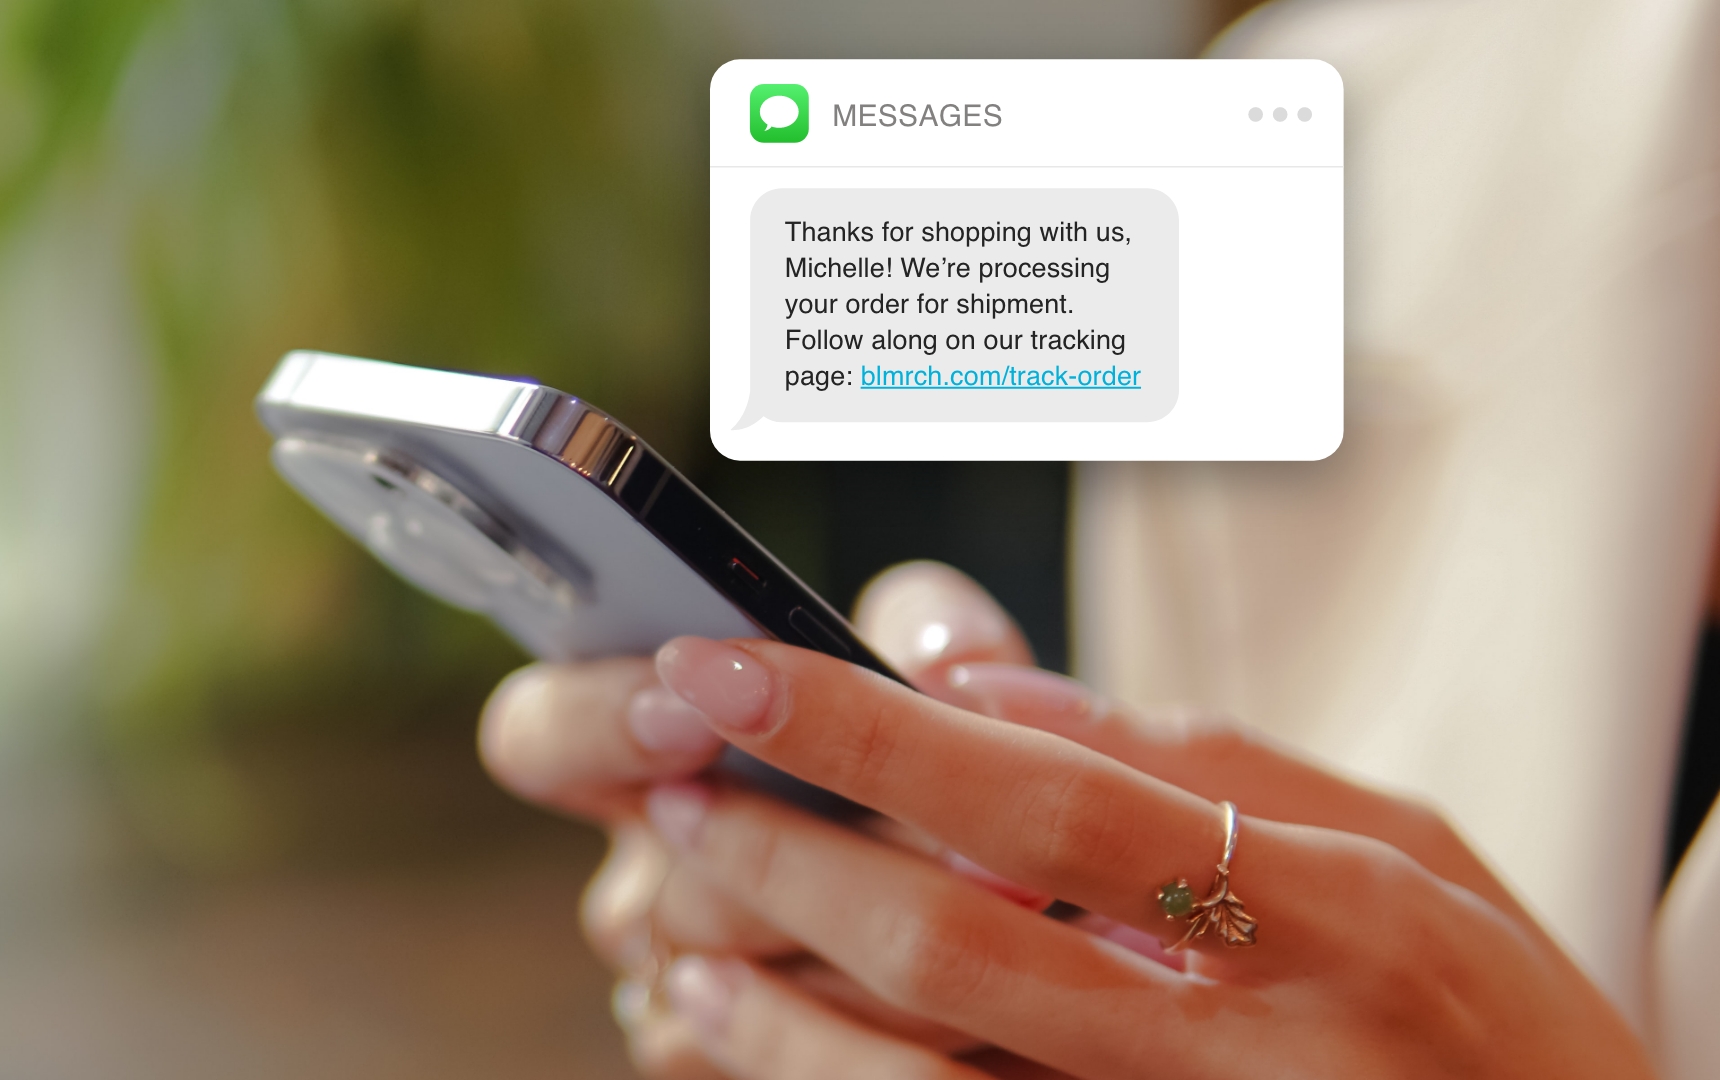 SMS and email marketing campaigns can complement each other well for your marketing strategy.